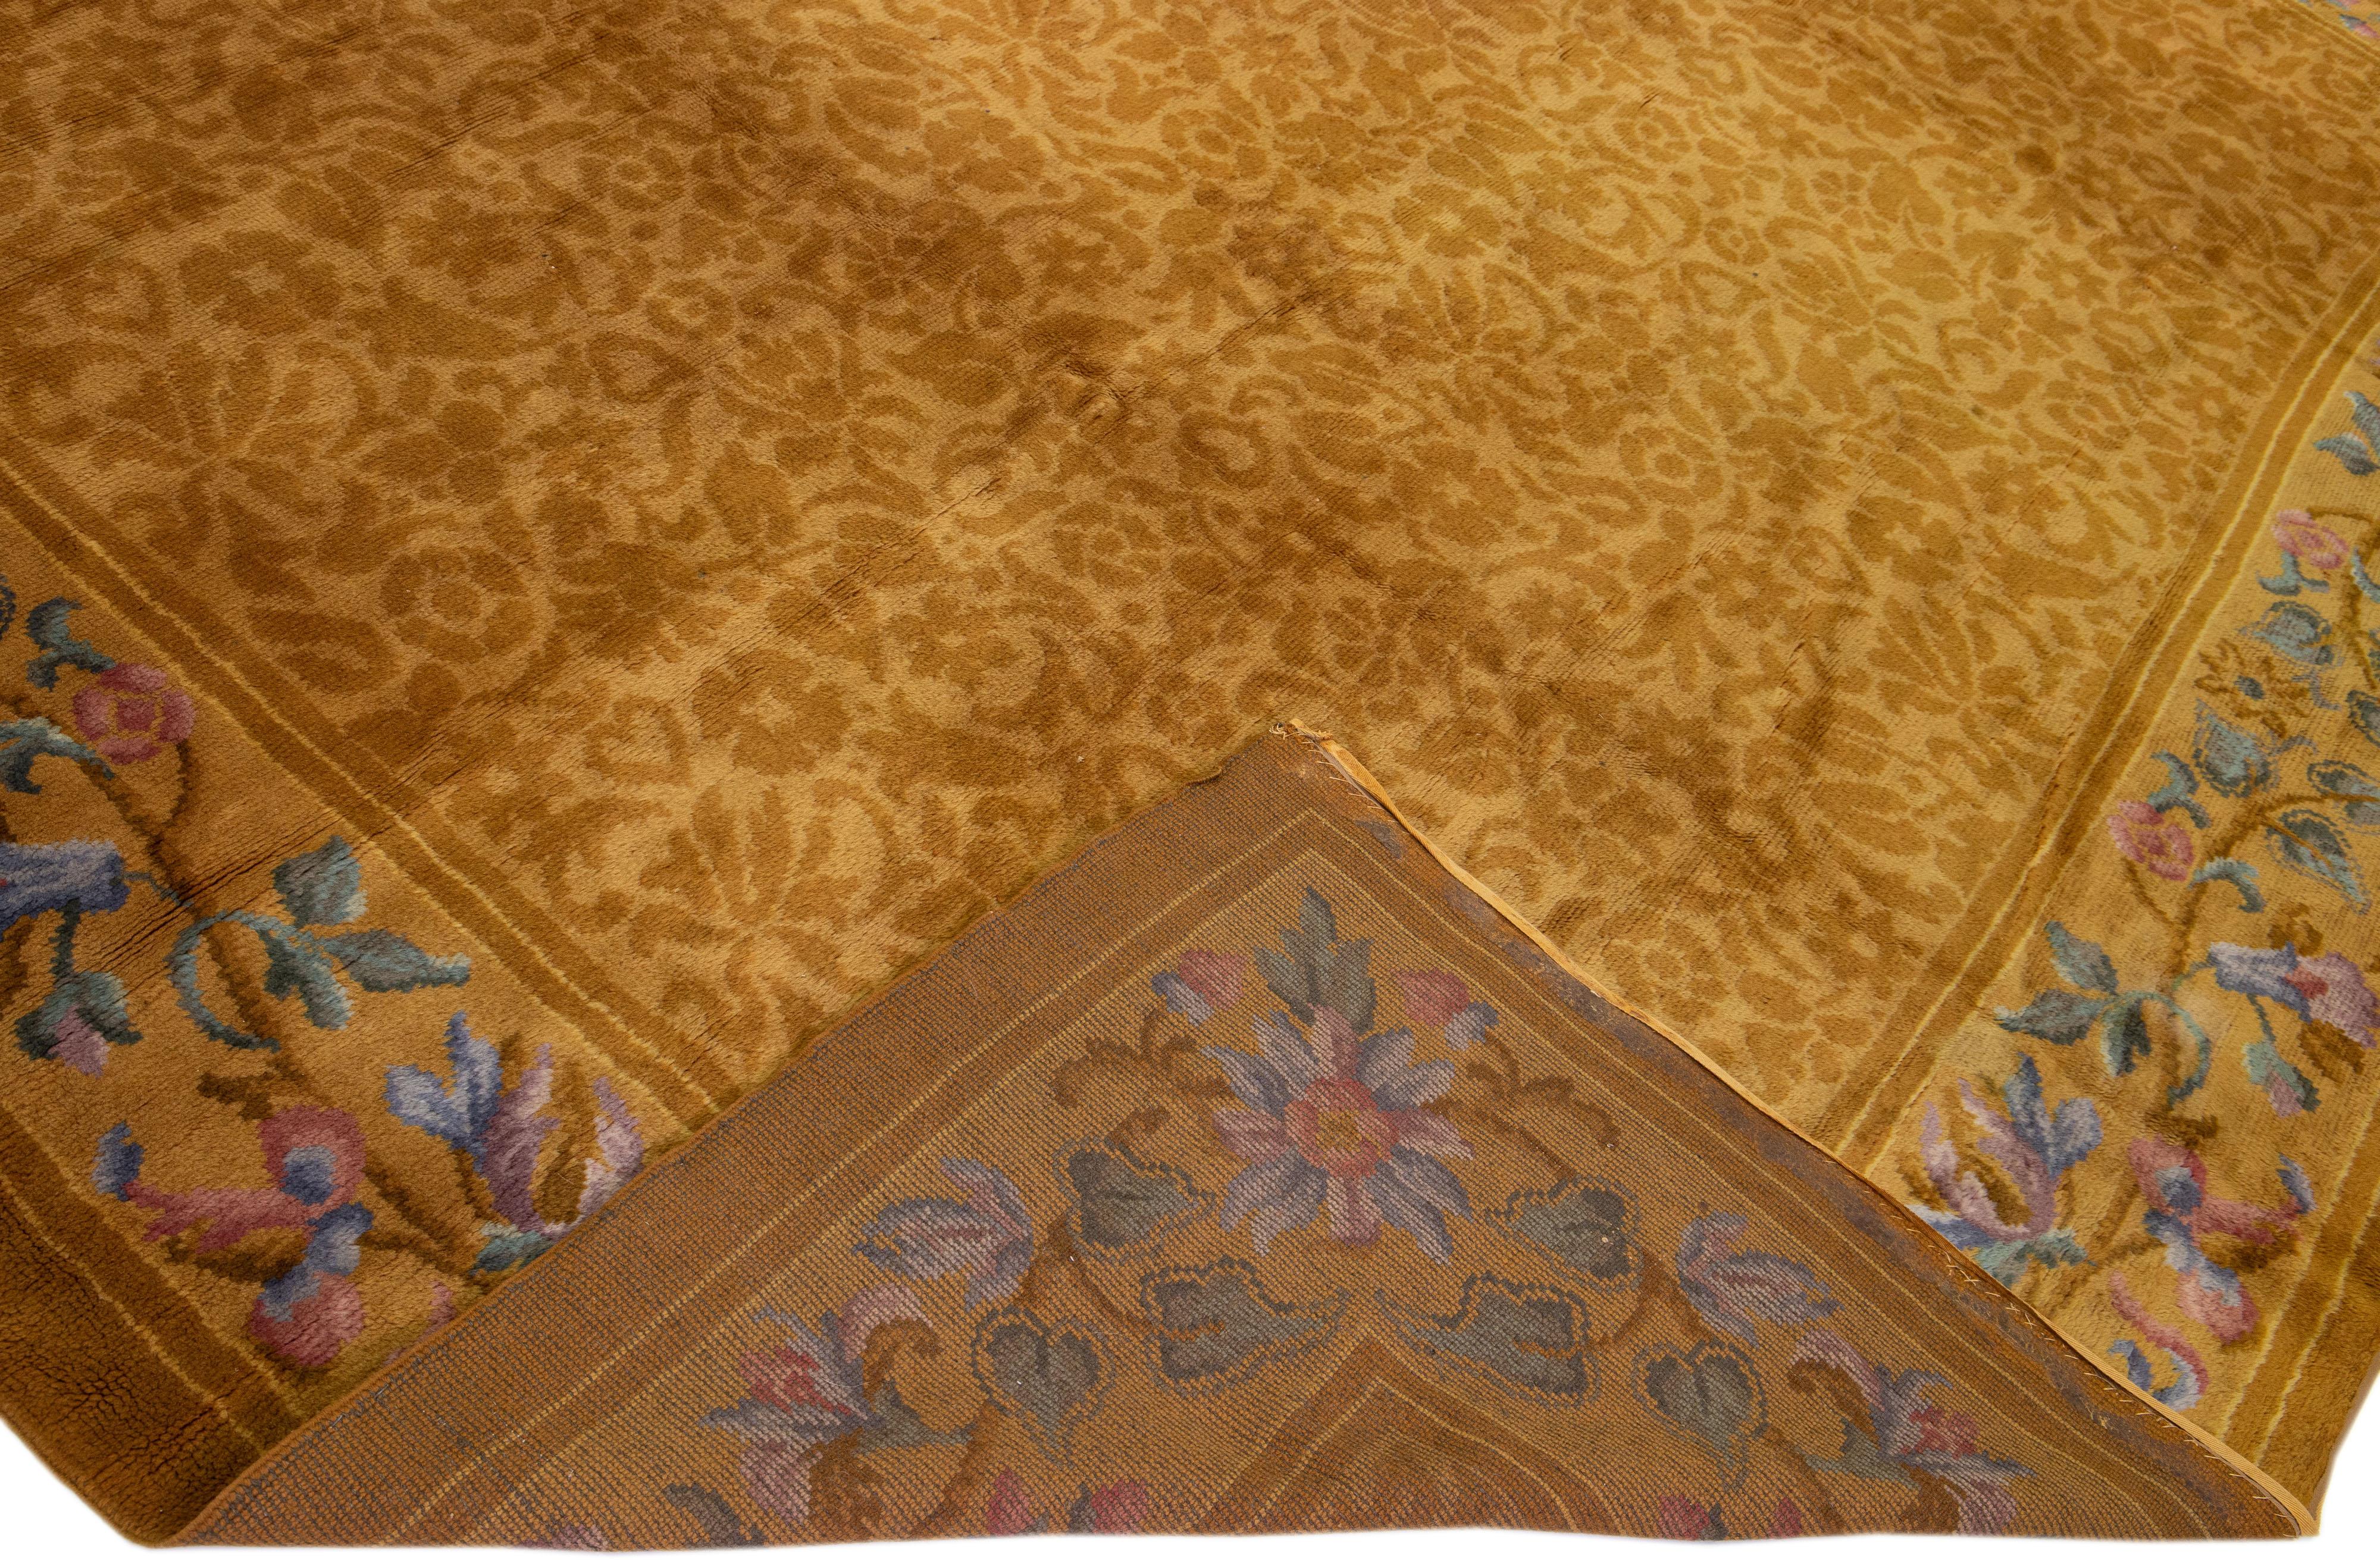 Beautiful antique Savonnerie hand-knotted wool rug with a goldenrod field. This piece has a designed frame and brown accents in a gorgeous all-over floral pattern design.

This rug measures: 12' x 17'6''.